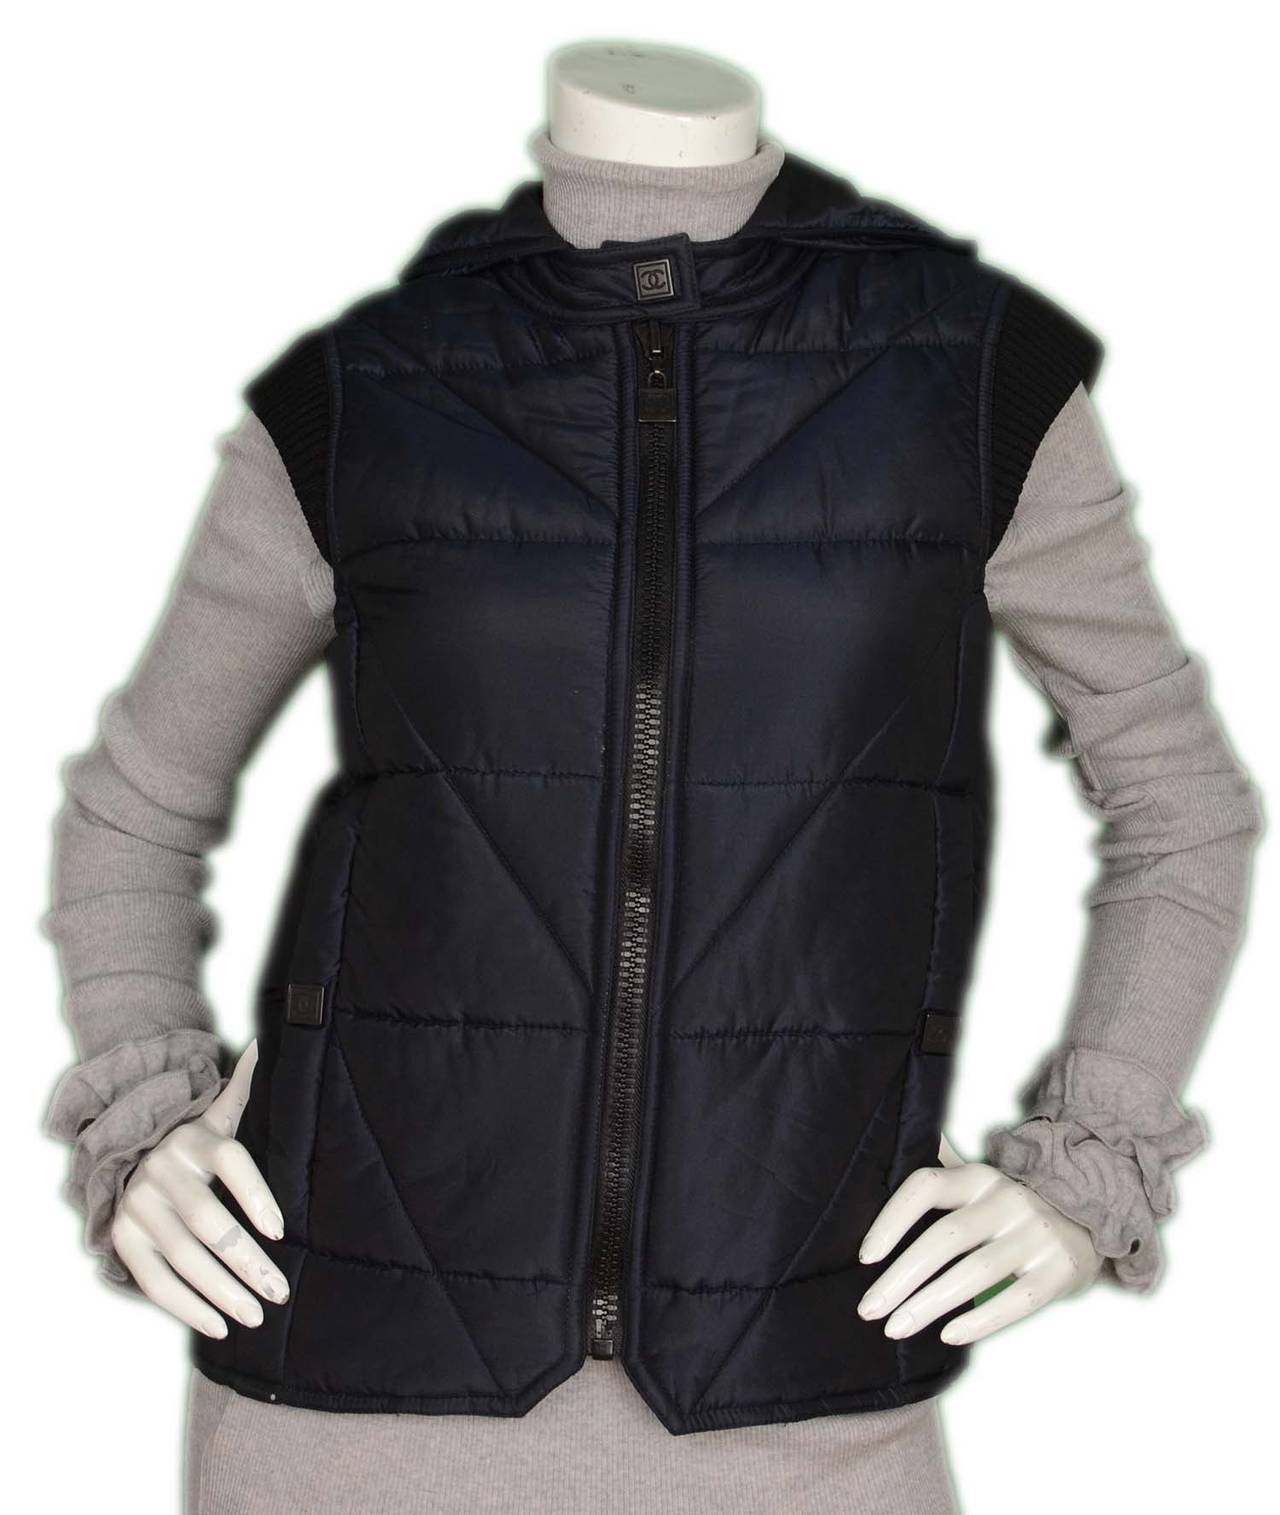 CHANEL Navy Silk Quilted Puffer Vest W/ Hood sz. 36

    Made in: France
    Year of Production: 2004
    Color: Navy
    Composition: 100% Silk
    Tags: Brand and composition tag are attached
    Lining: 100% Silk
    Closure/opening: